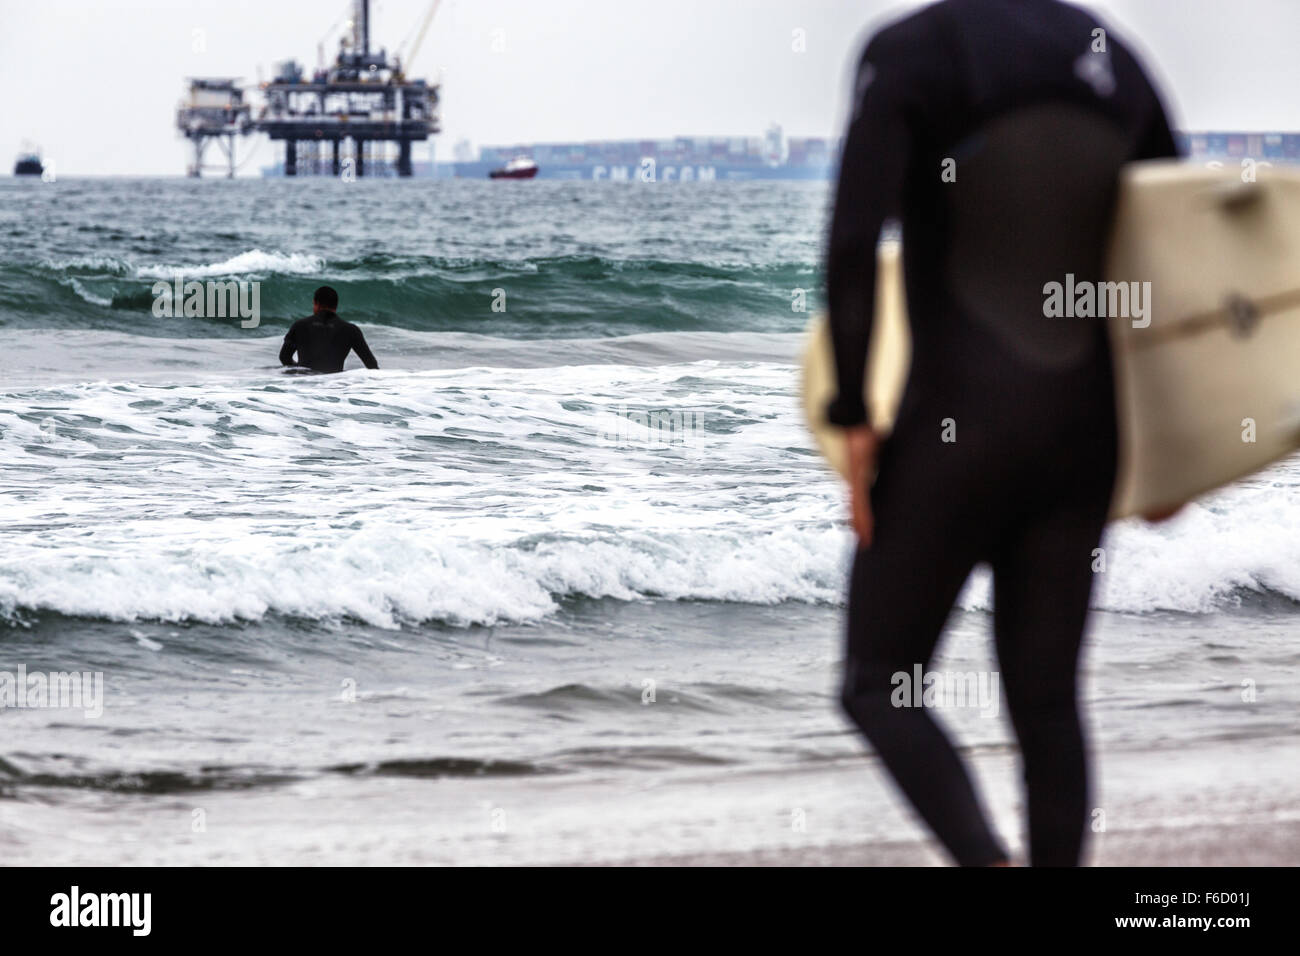 Two surfers going into the water. Stock Photo